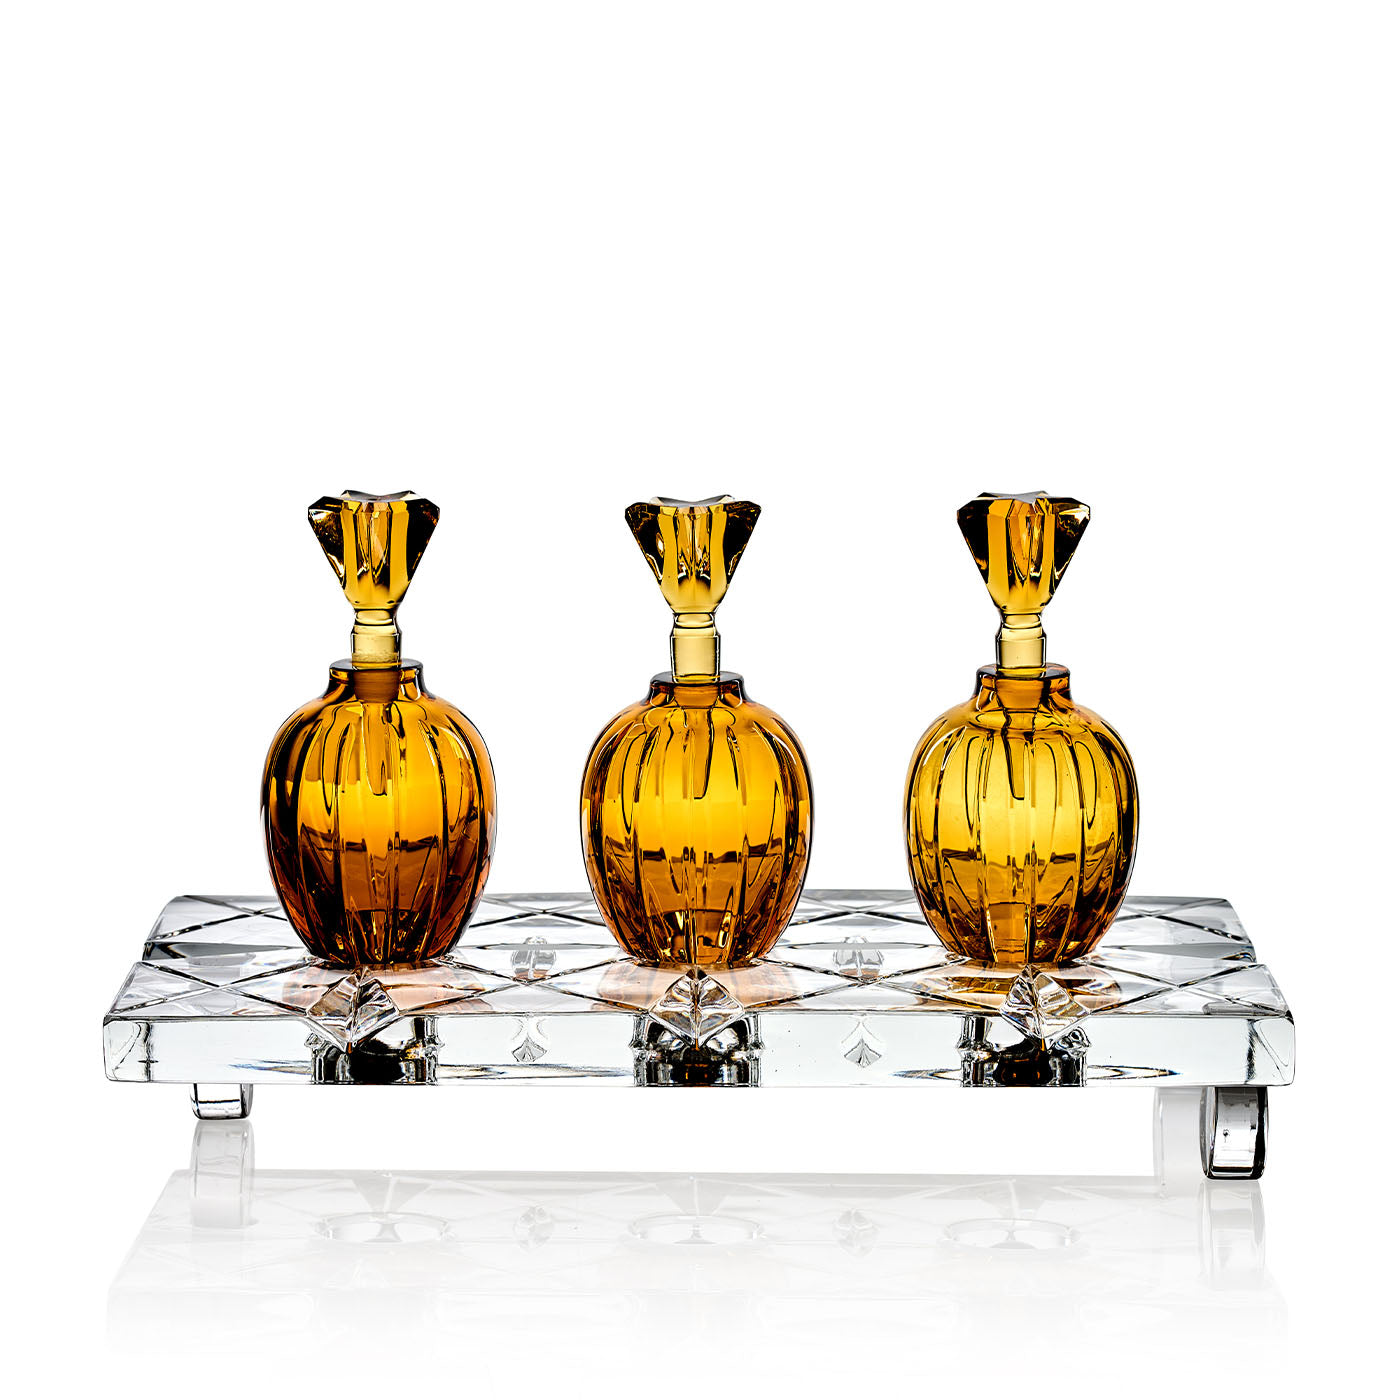 Scented Crystal Perfume Bottles Trilogy  - Alternative view 1